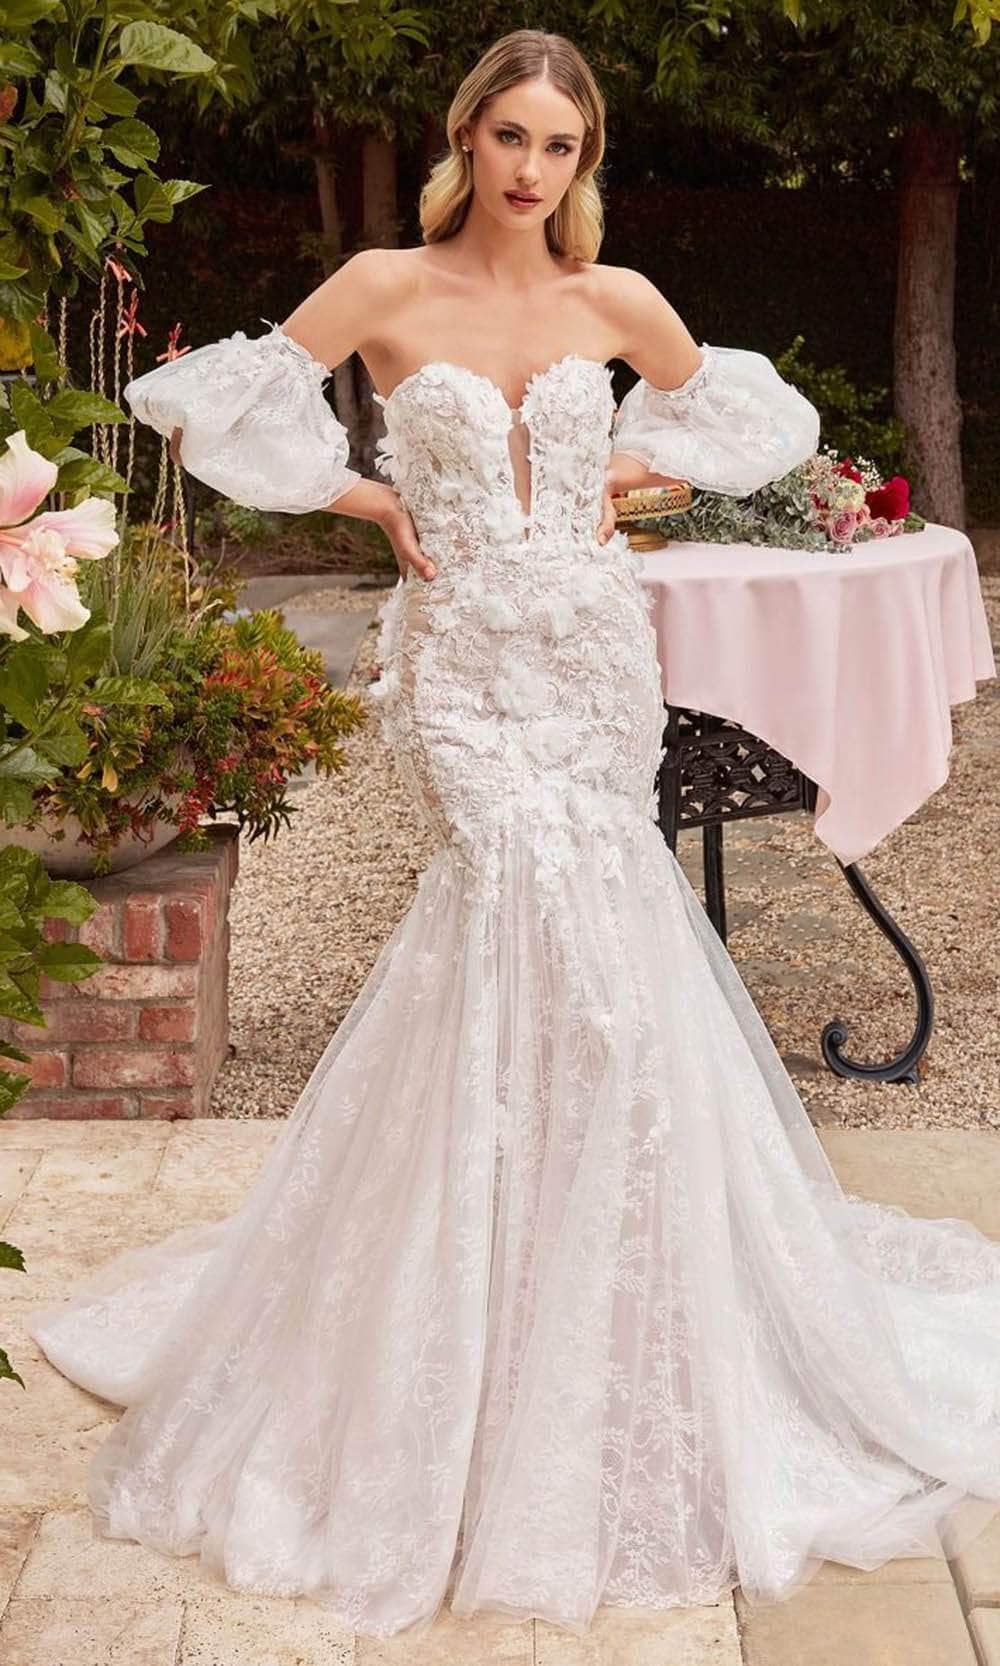 Ladivine CDS434W - Mermaid Bridal Gown 2 / Off White-Nude